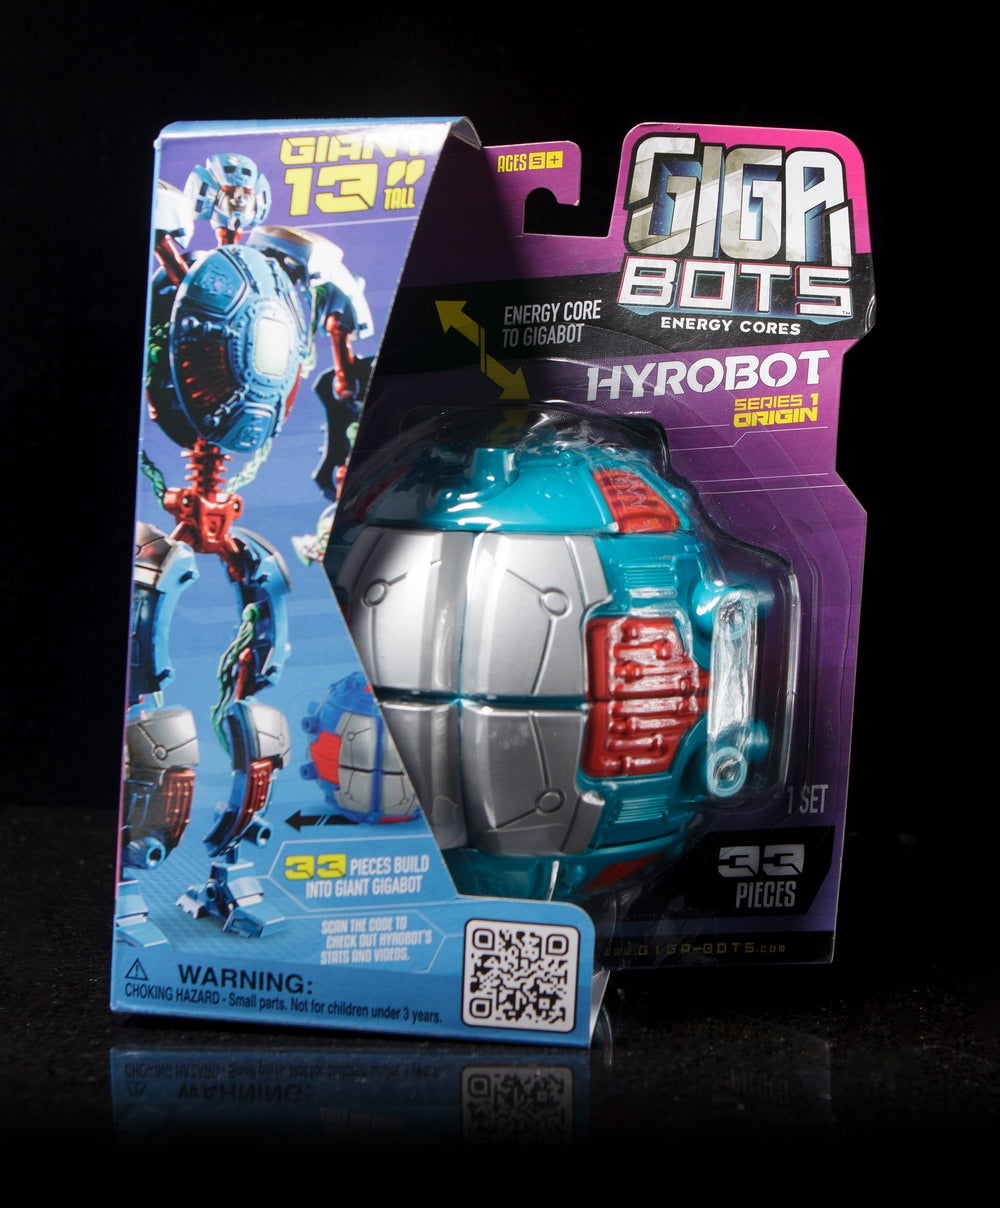 REVIEW: Introducing Gigabots, by Blip Toys | Figures.com